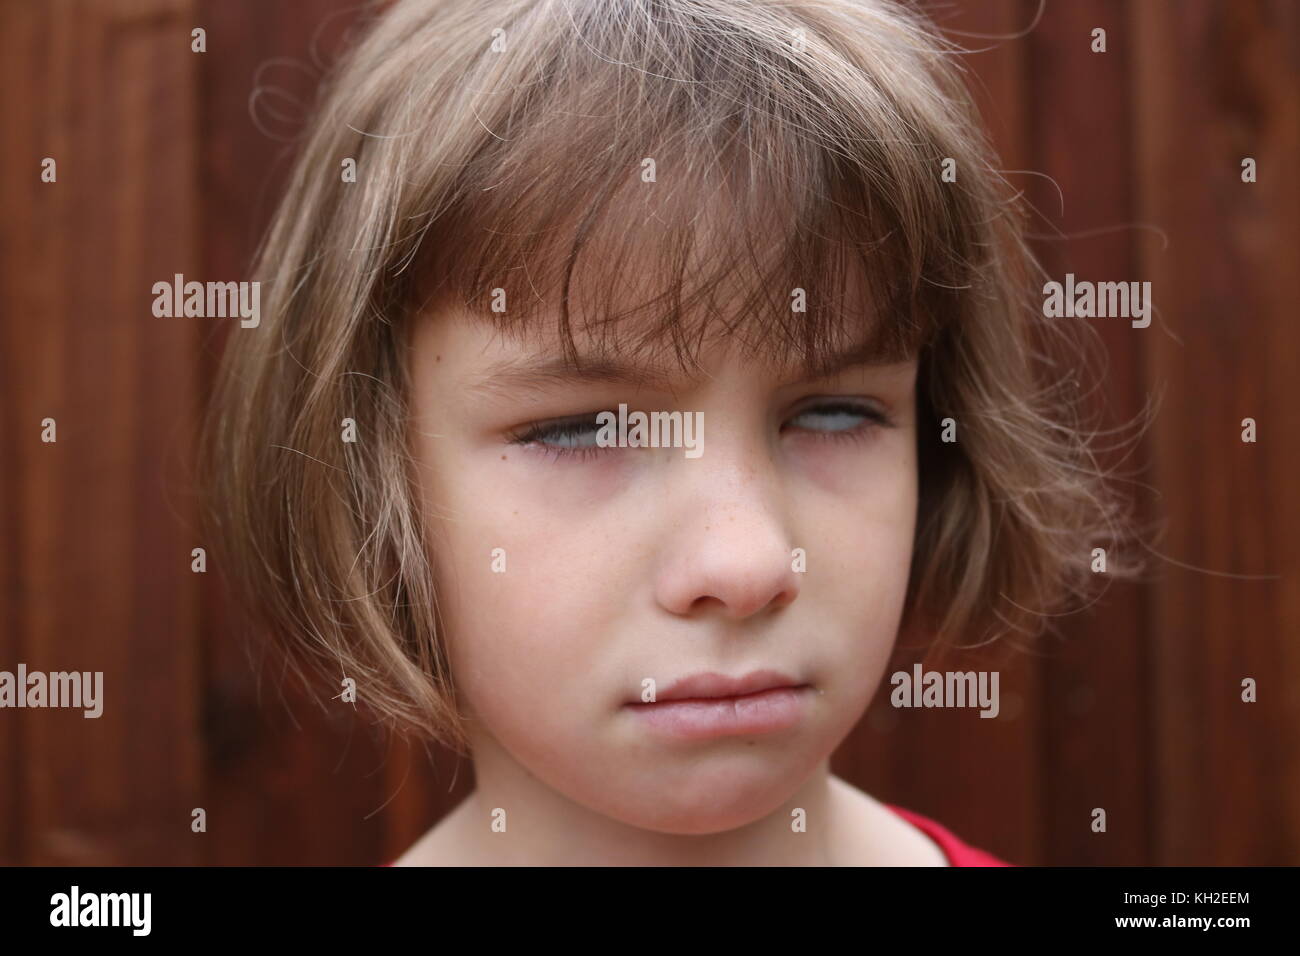 Portrait of a young girl rolling her eyes Stock Photo